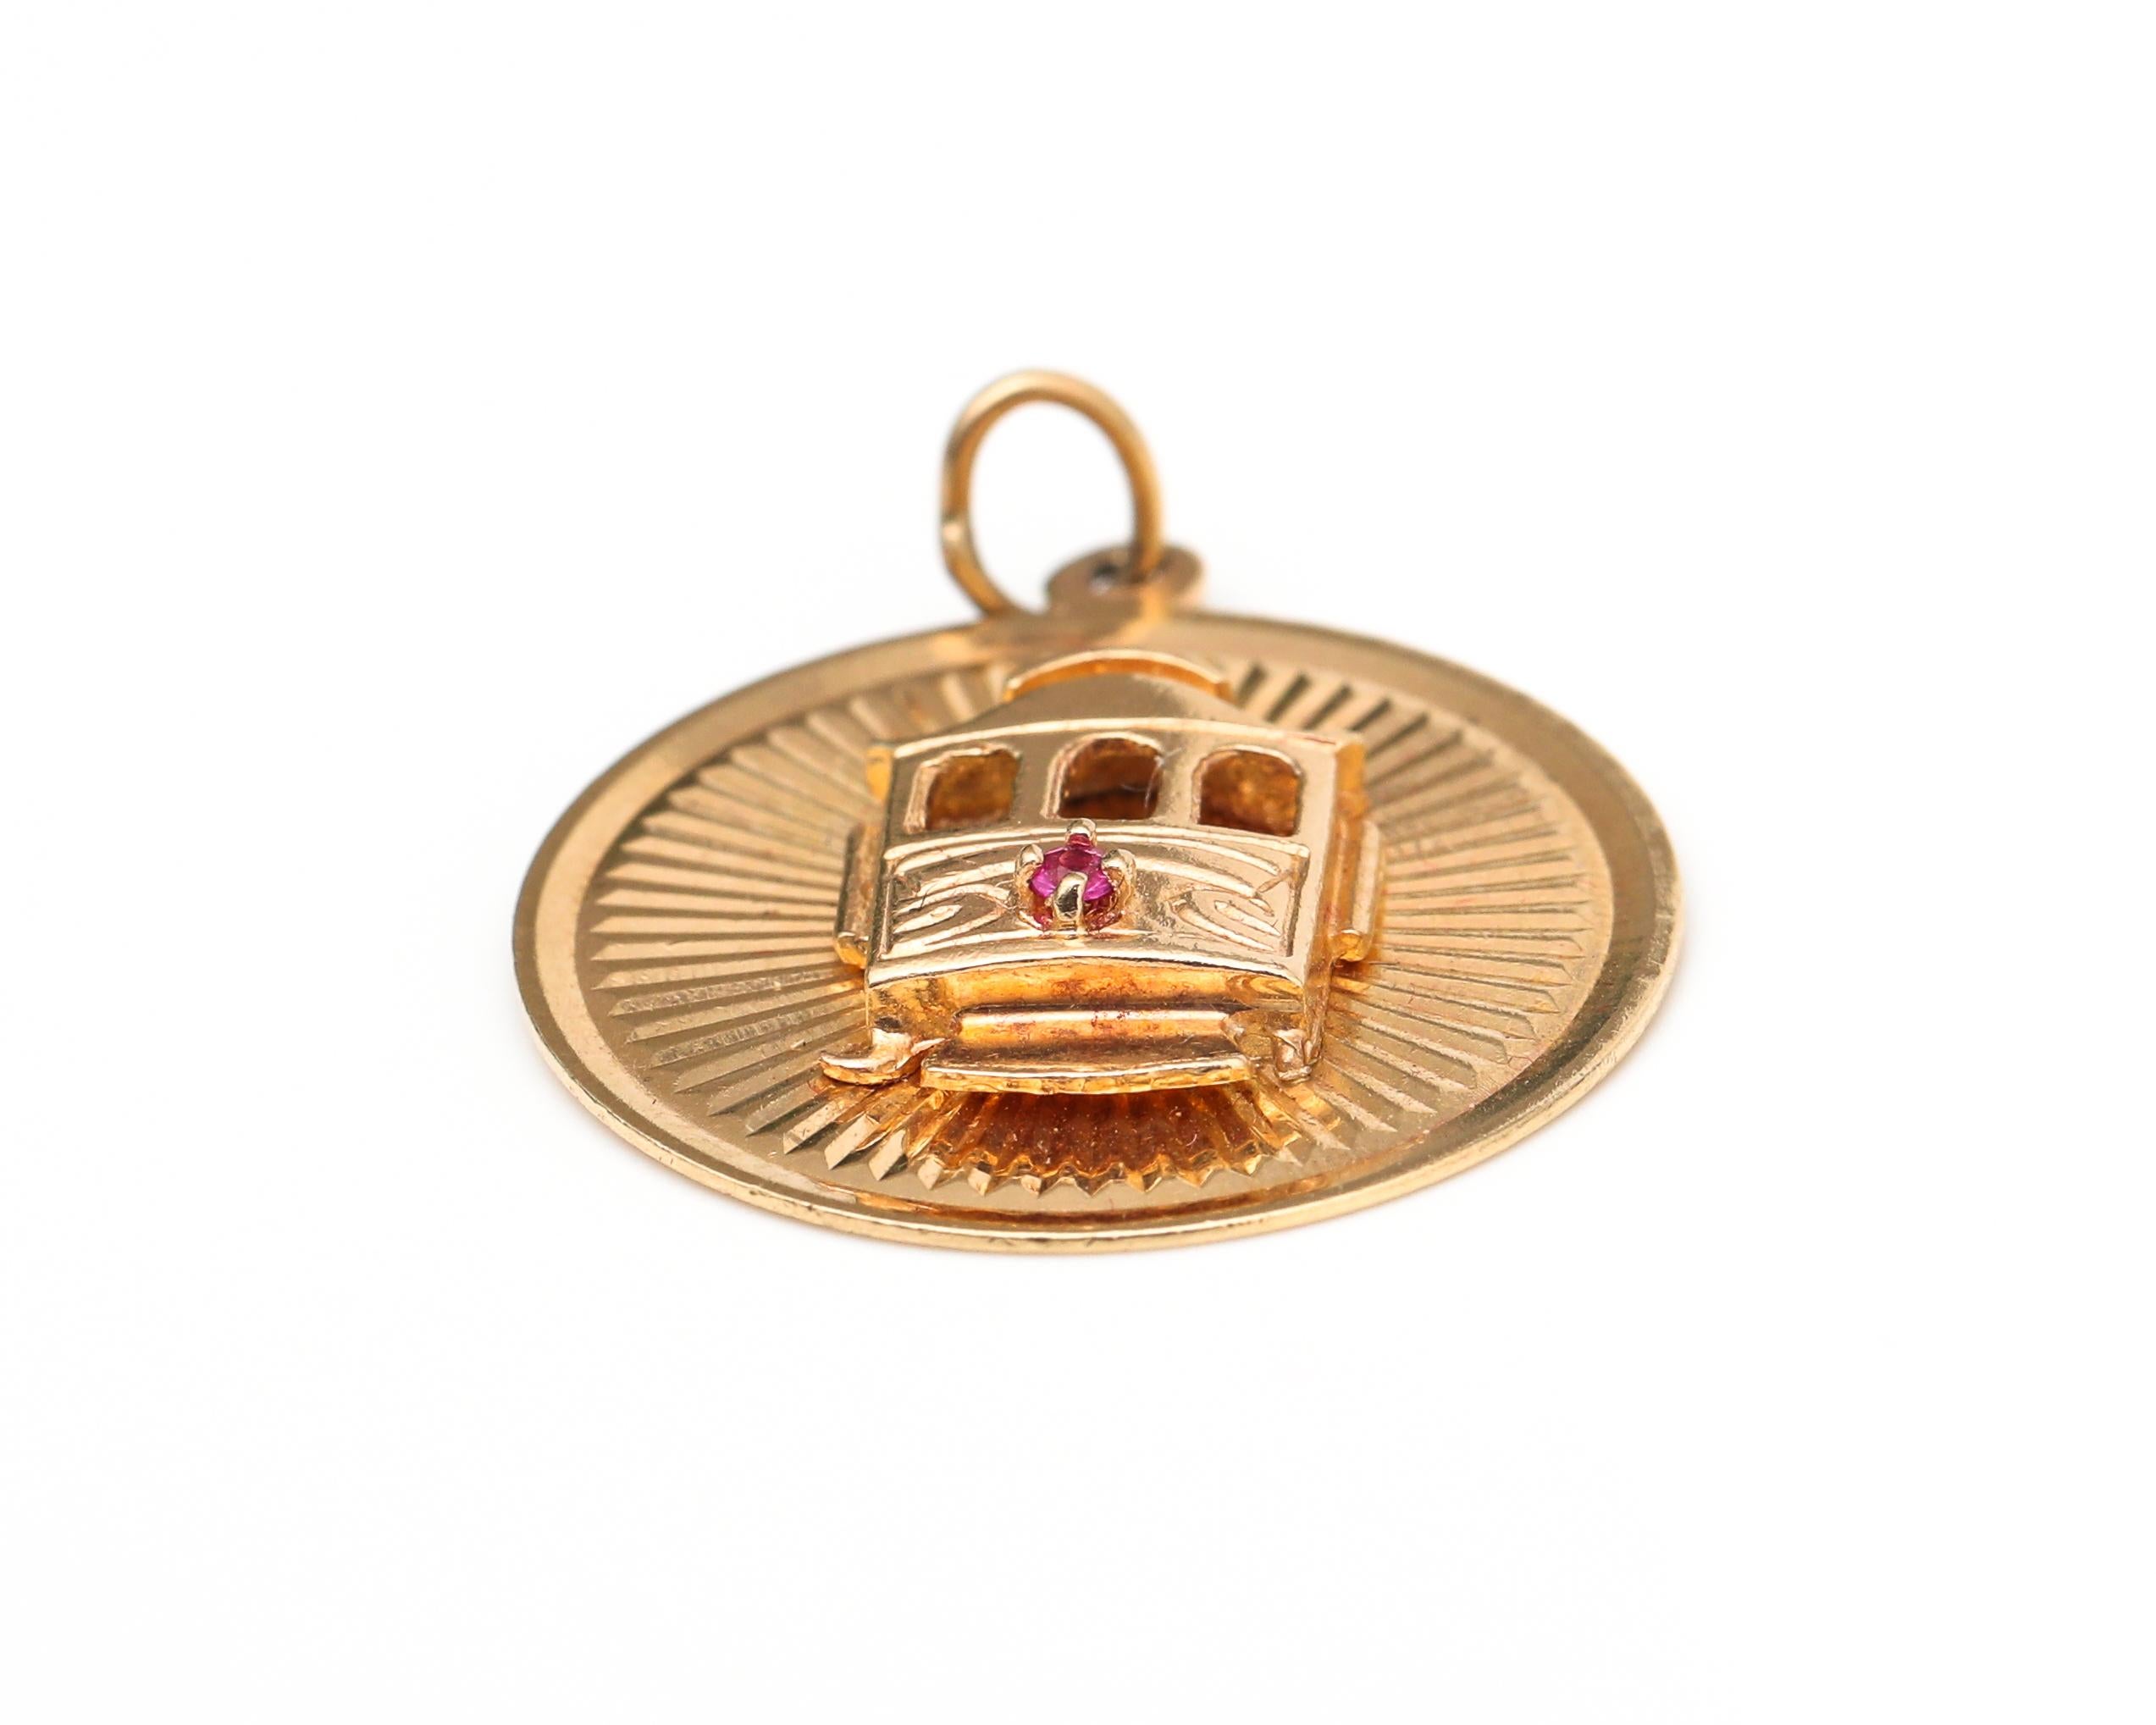 Charm details:
Gold: 14 Karat Yellow Gold
Weight: 3.79 grams
Measurement:

On the back of the charm the following is engraved: SAN FRANCISCO CABLE CAR, INVENTED BY ANDREW HALLIDEE 1873, HISTORICAL NATIONAL MONUMENT 

The cable car is made in a 3-d